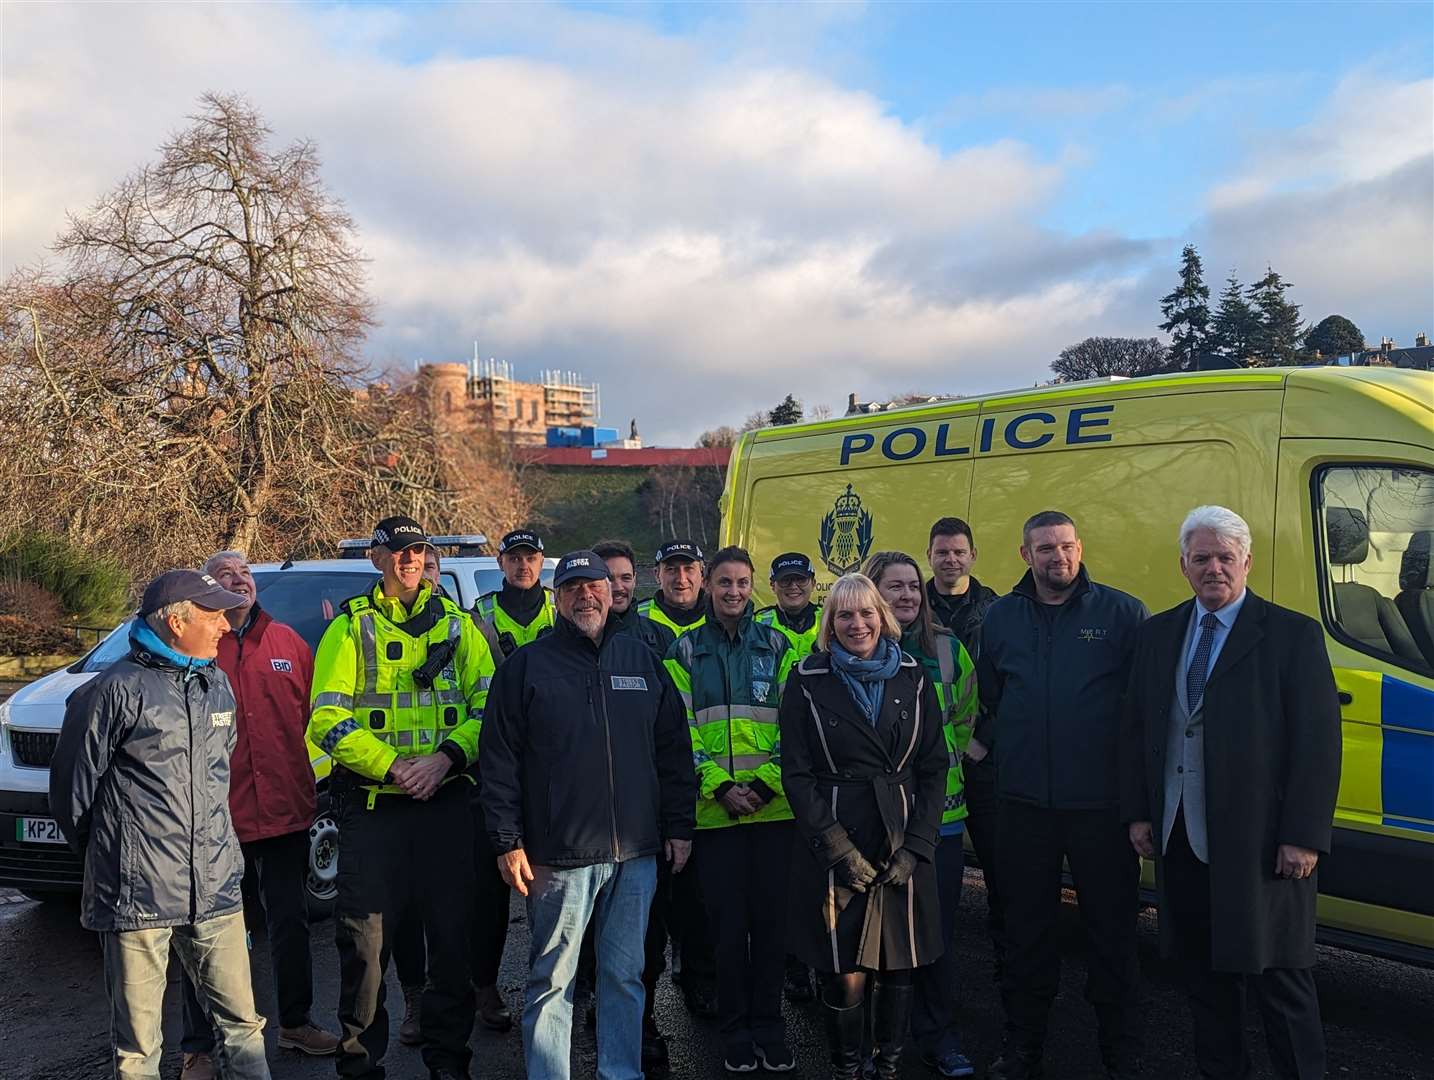 Police Scotland are set to collaborate with other agencies this festive period with the aim of keeping those in Inverness safe.